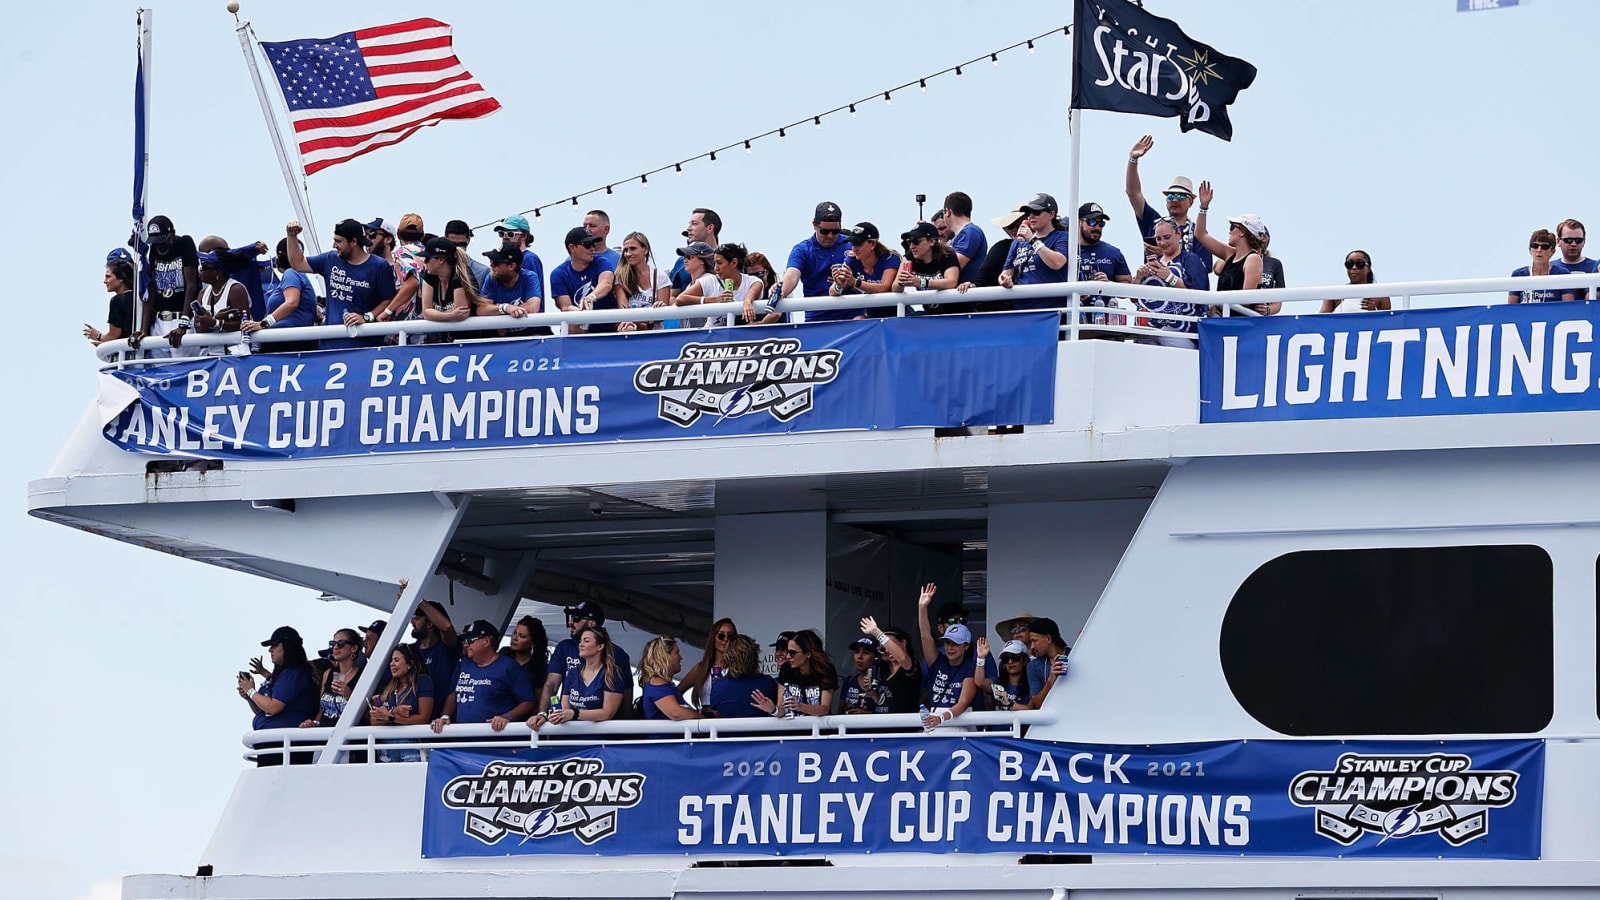 Sights, sounds from the Lightning's Stanley Cup boat parade